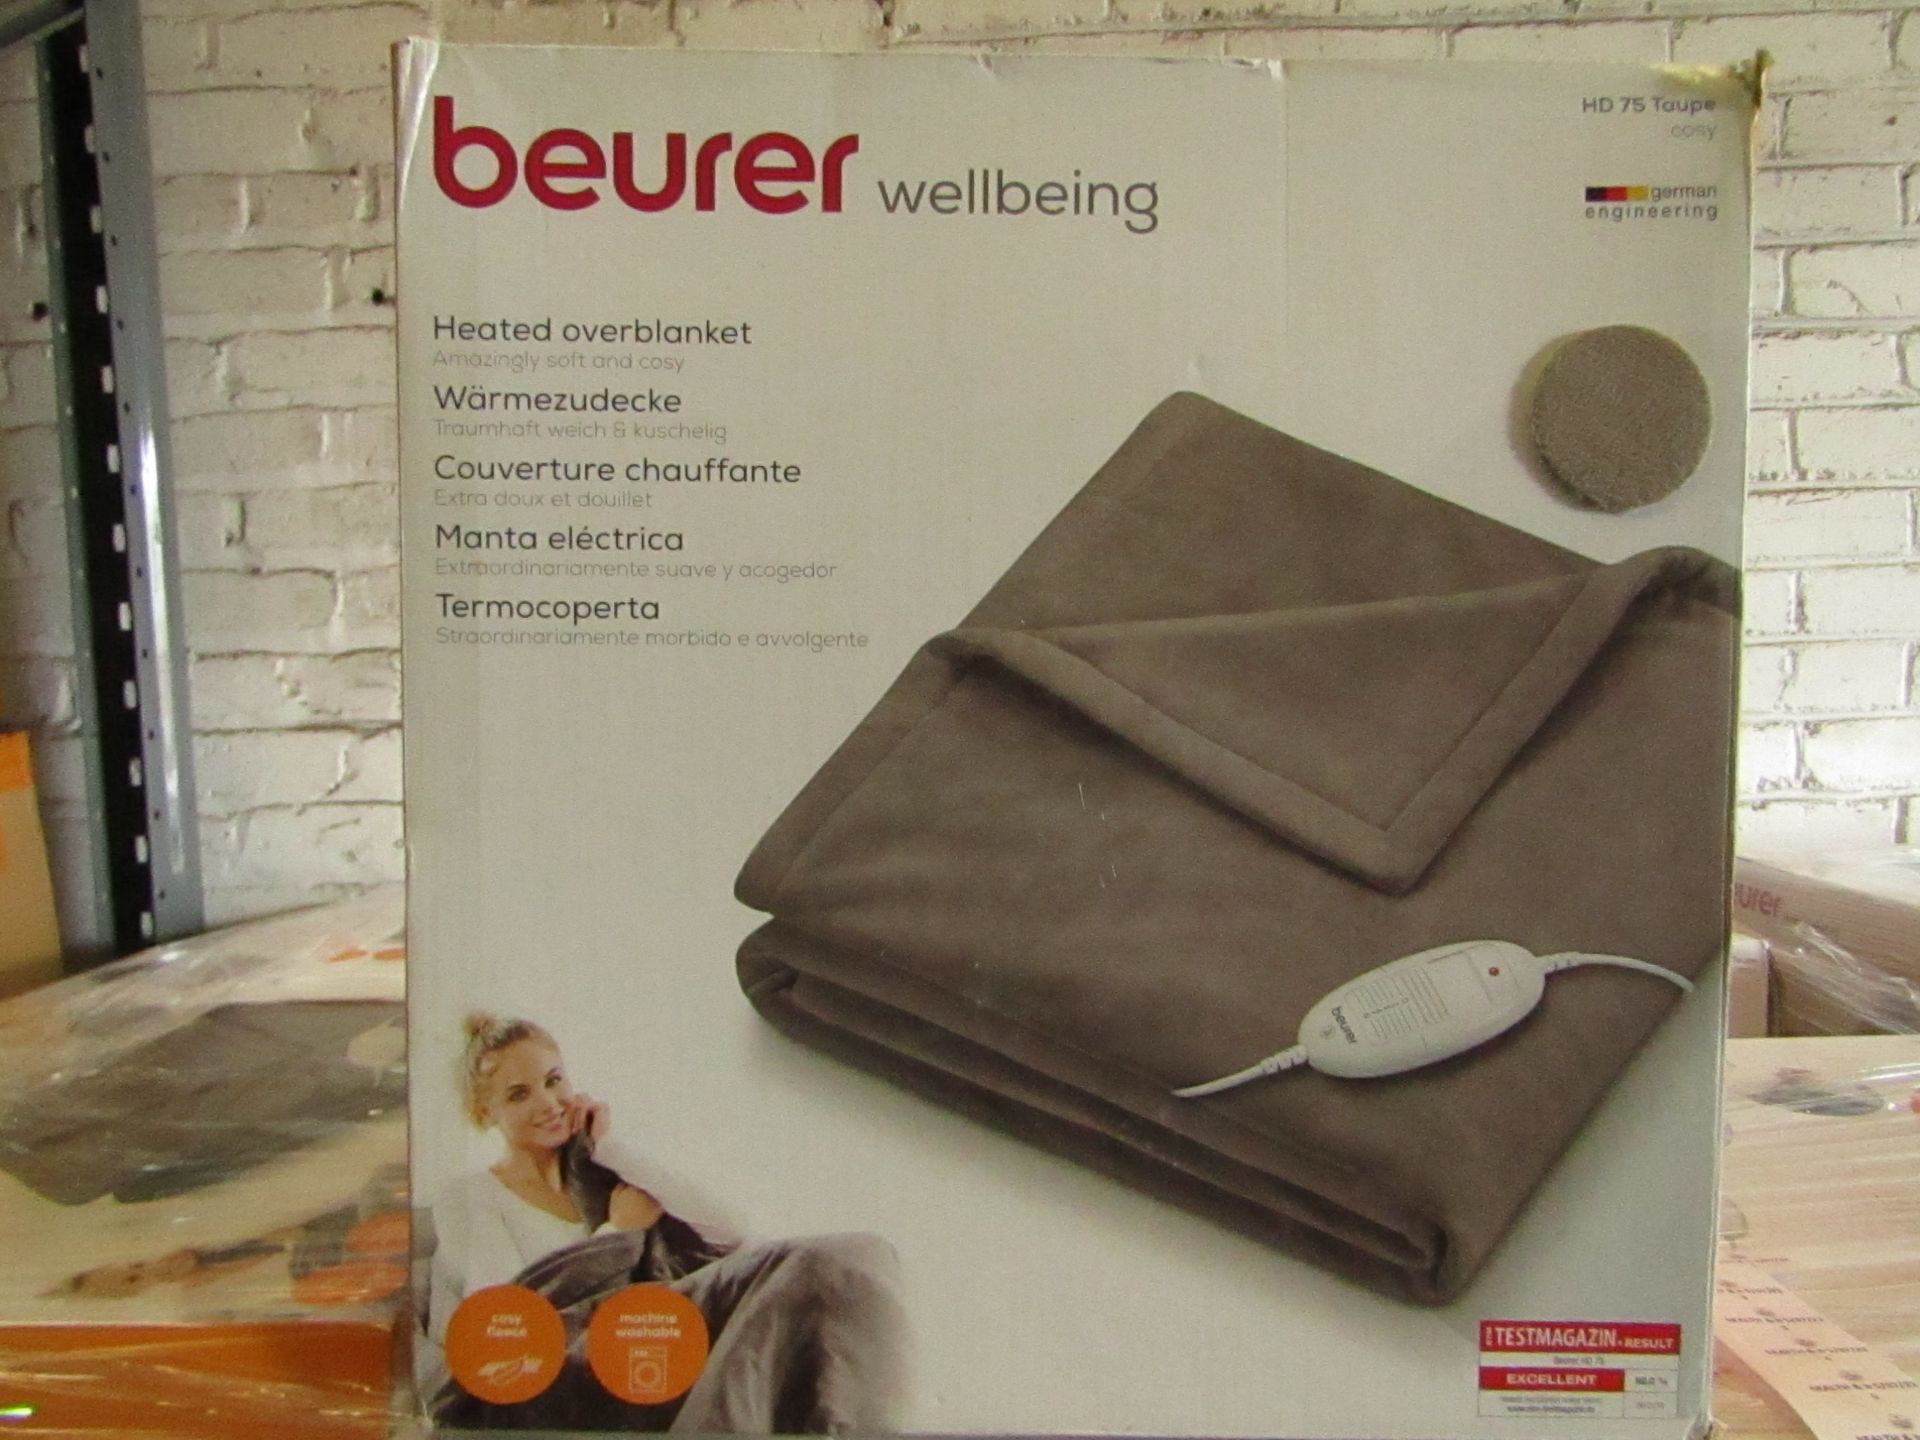 5X Beurer - Heated Overblanket Soft & Cosy - Colour Taupe HD75 - Looks In Good Condition & Boxed.